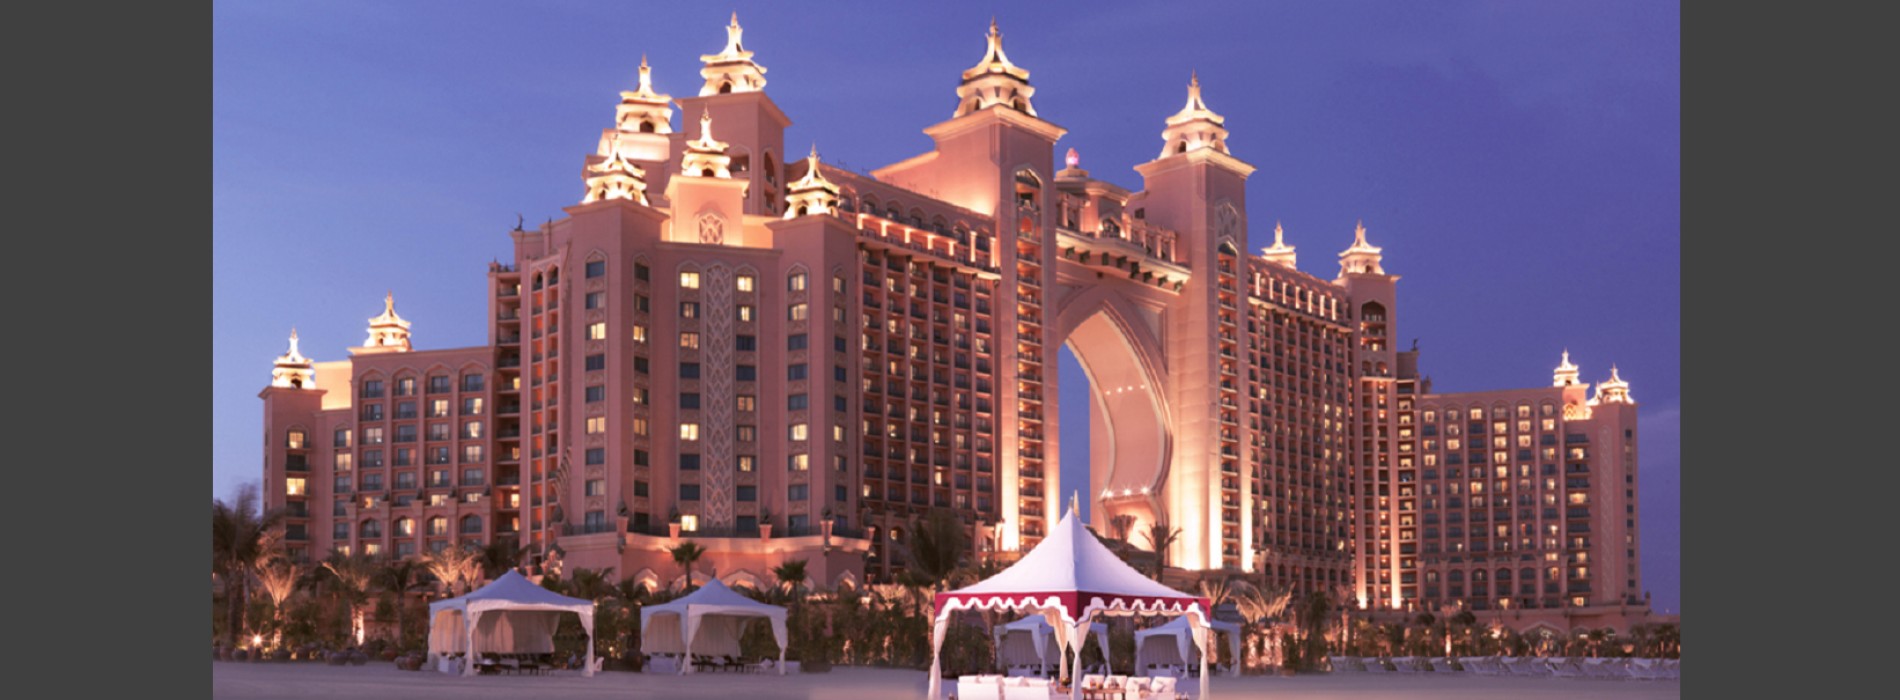 Atlantis, The Palm, Dubai receives an overwhelming response during a three-city roadshow in India